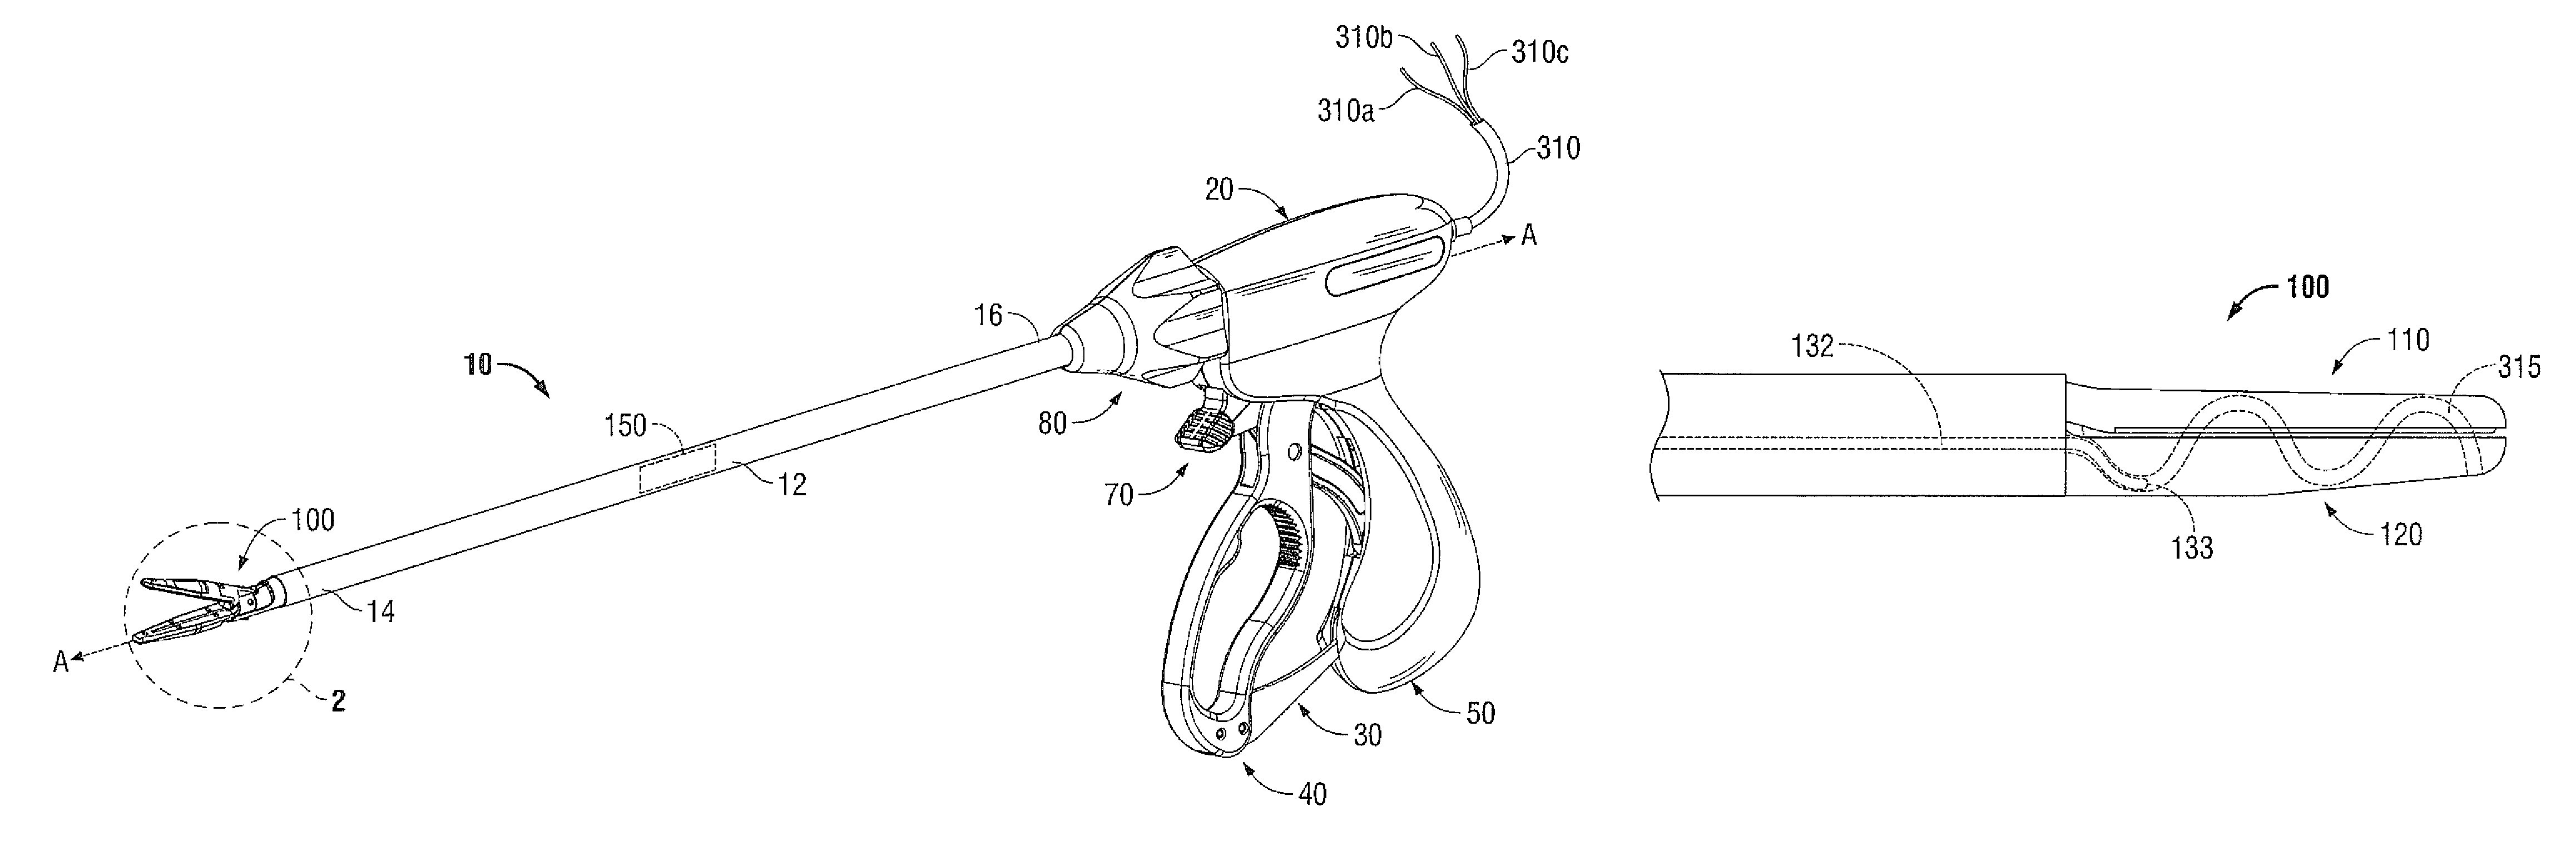 Apparatus, system, and method for performing an electrosurgical procedure